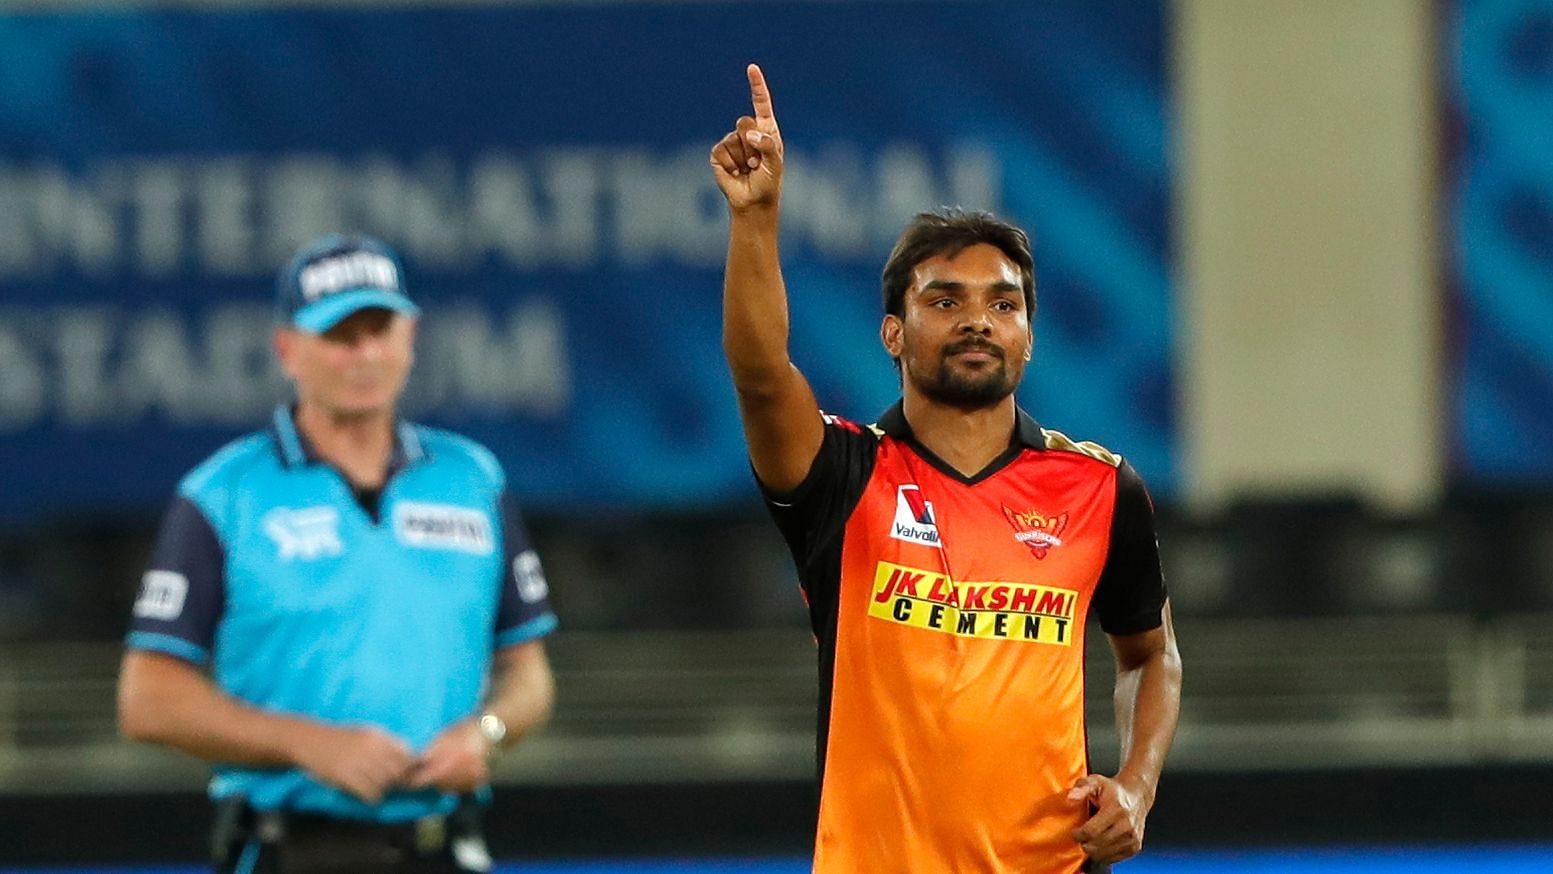 SunRisers Hyderabad’s Sandeep Sharma became the sixth Indian fast bowler to pick 100 wickets in the IPL.